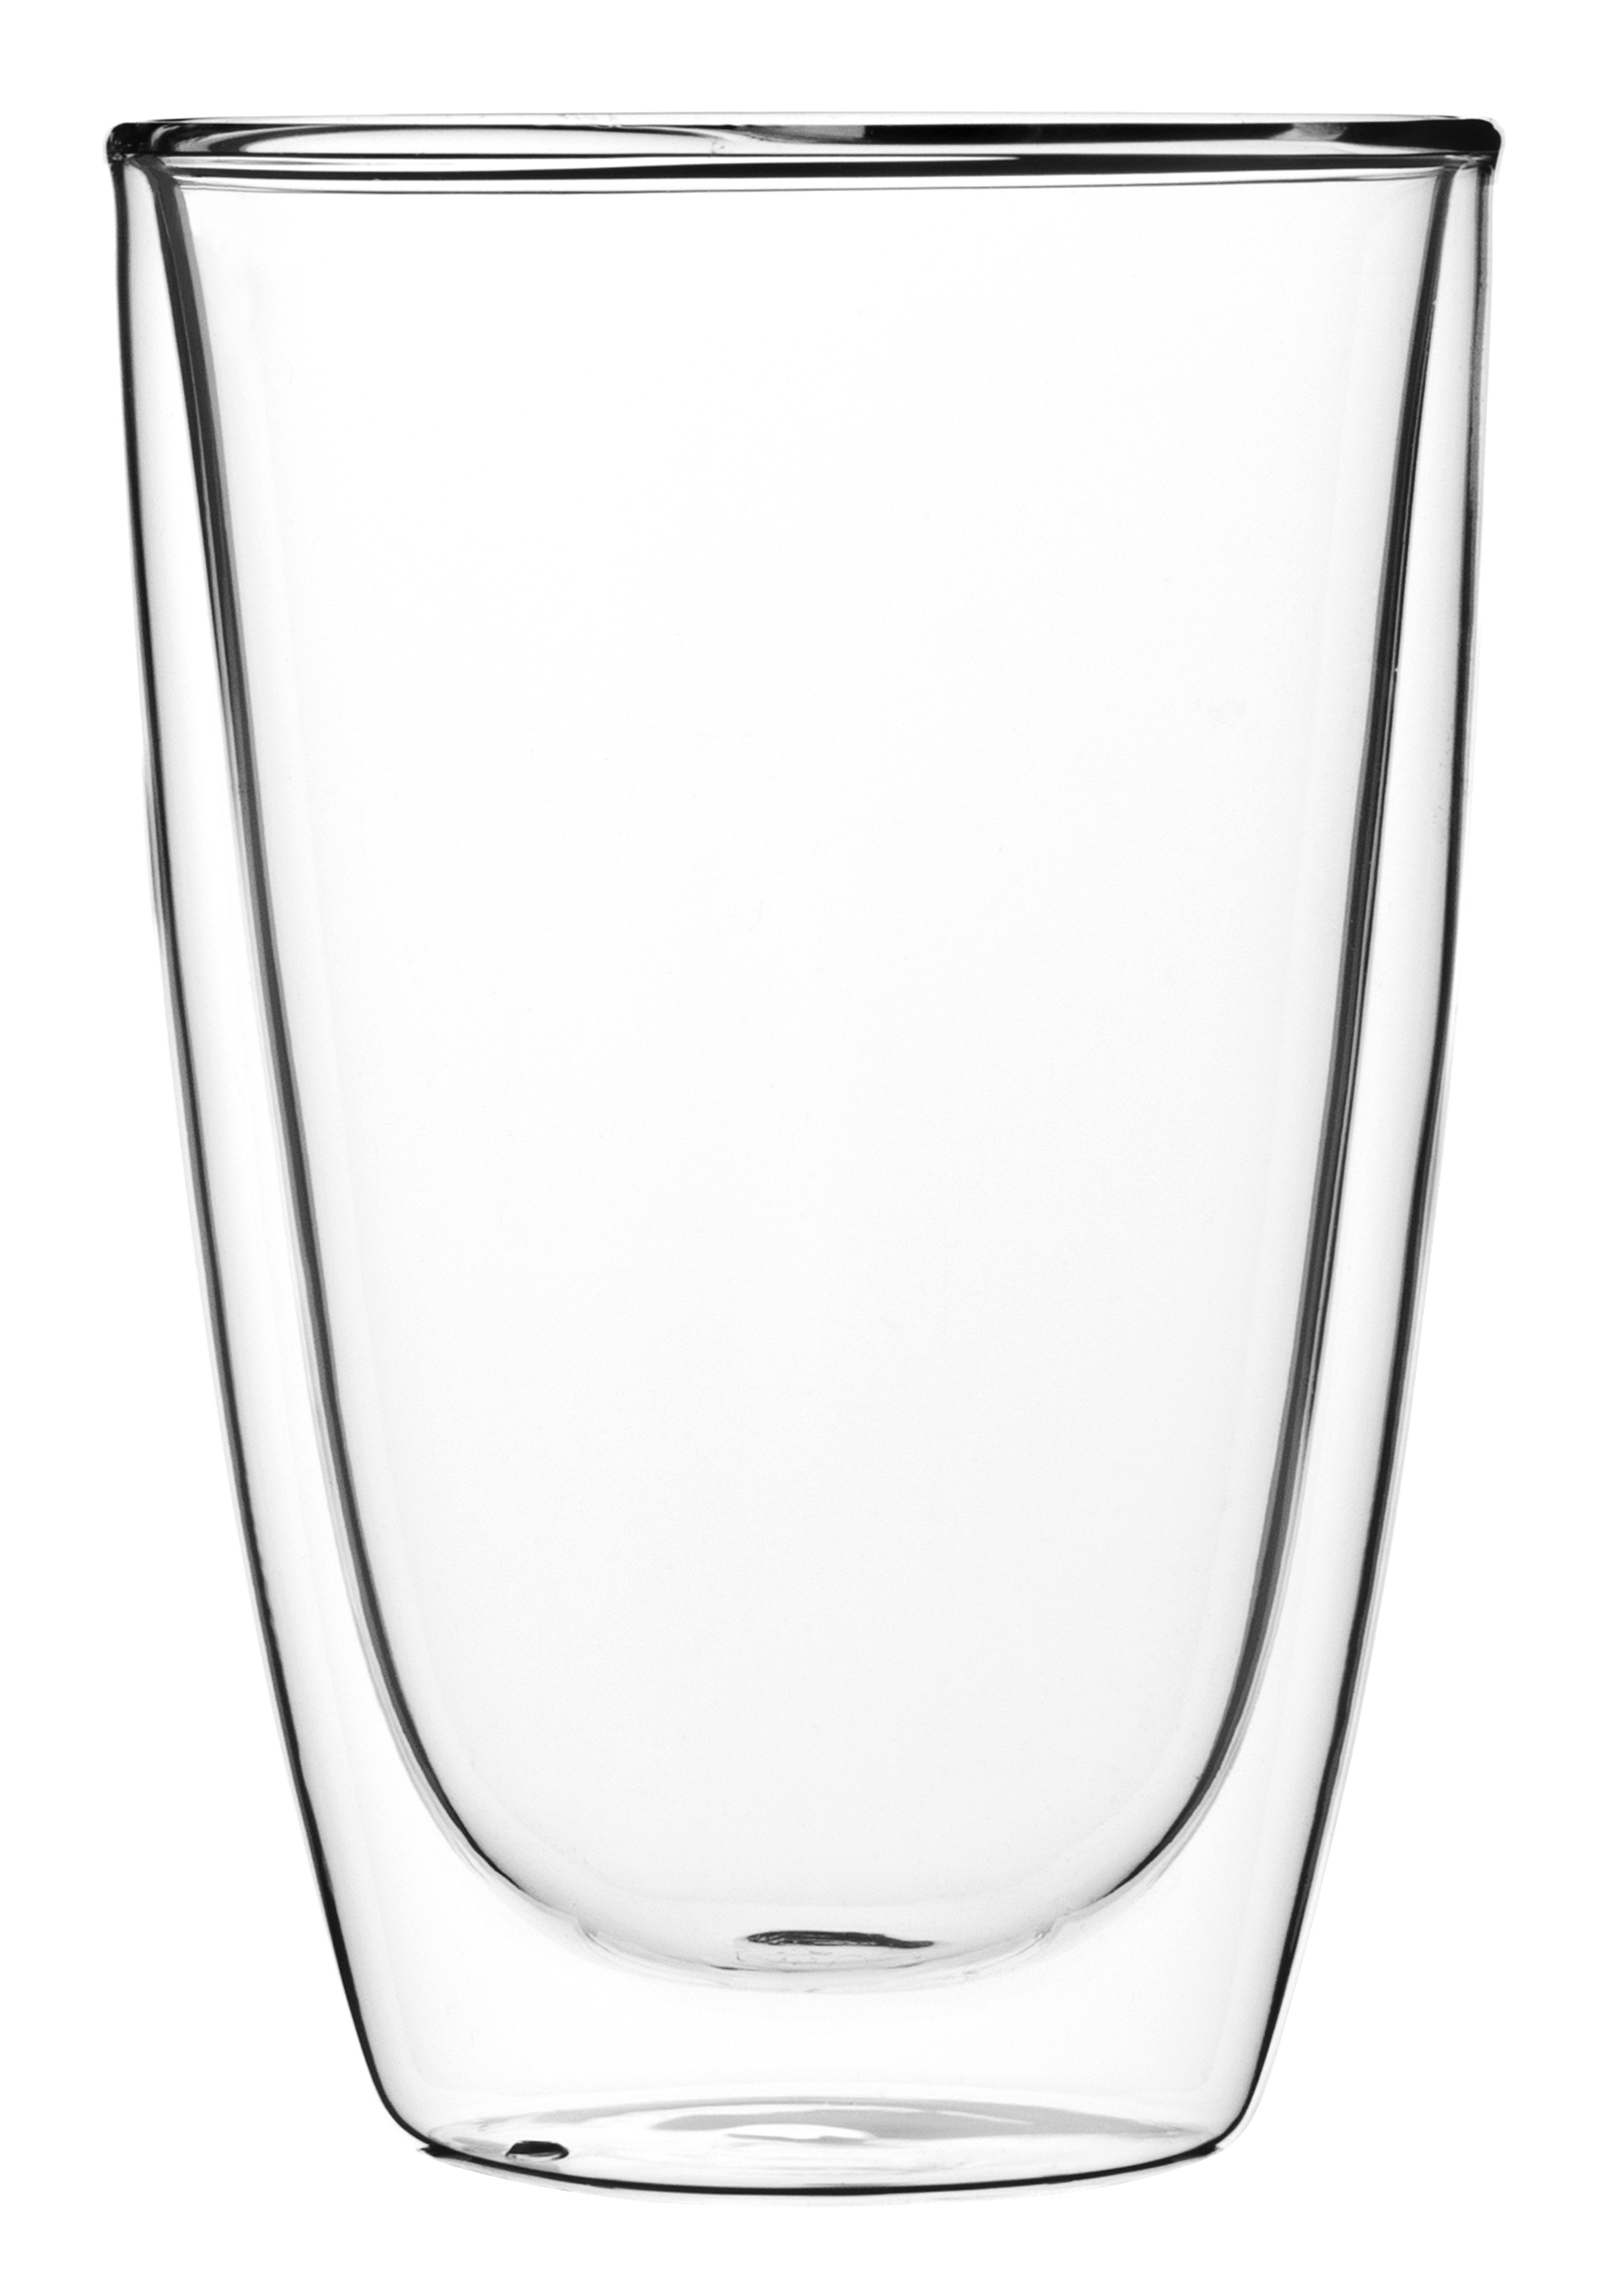 Latte Macciato glass without handle, double-walled, Lounge - 0,31l